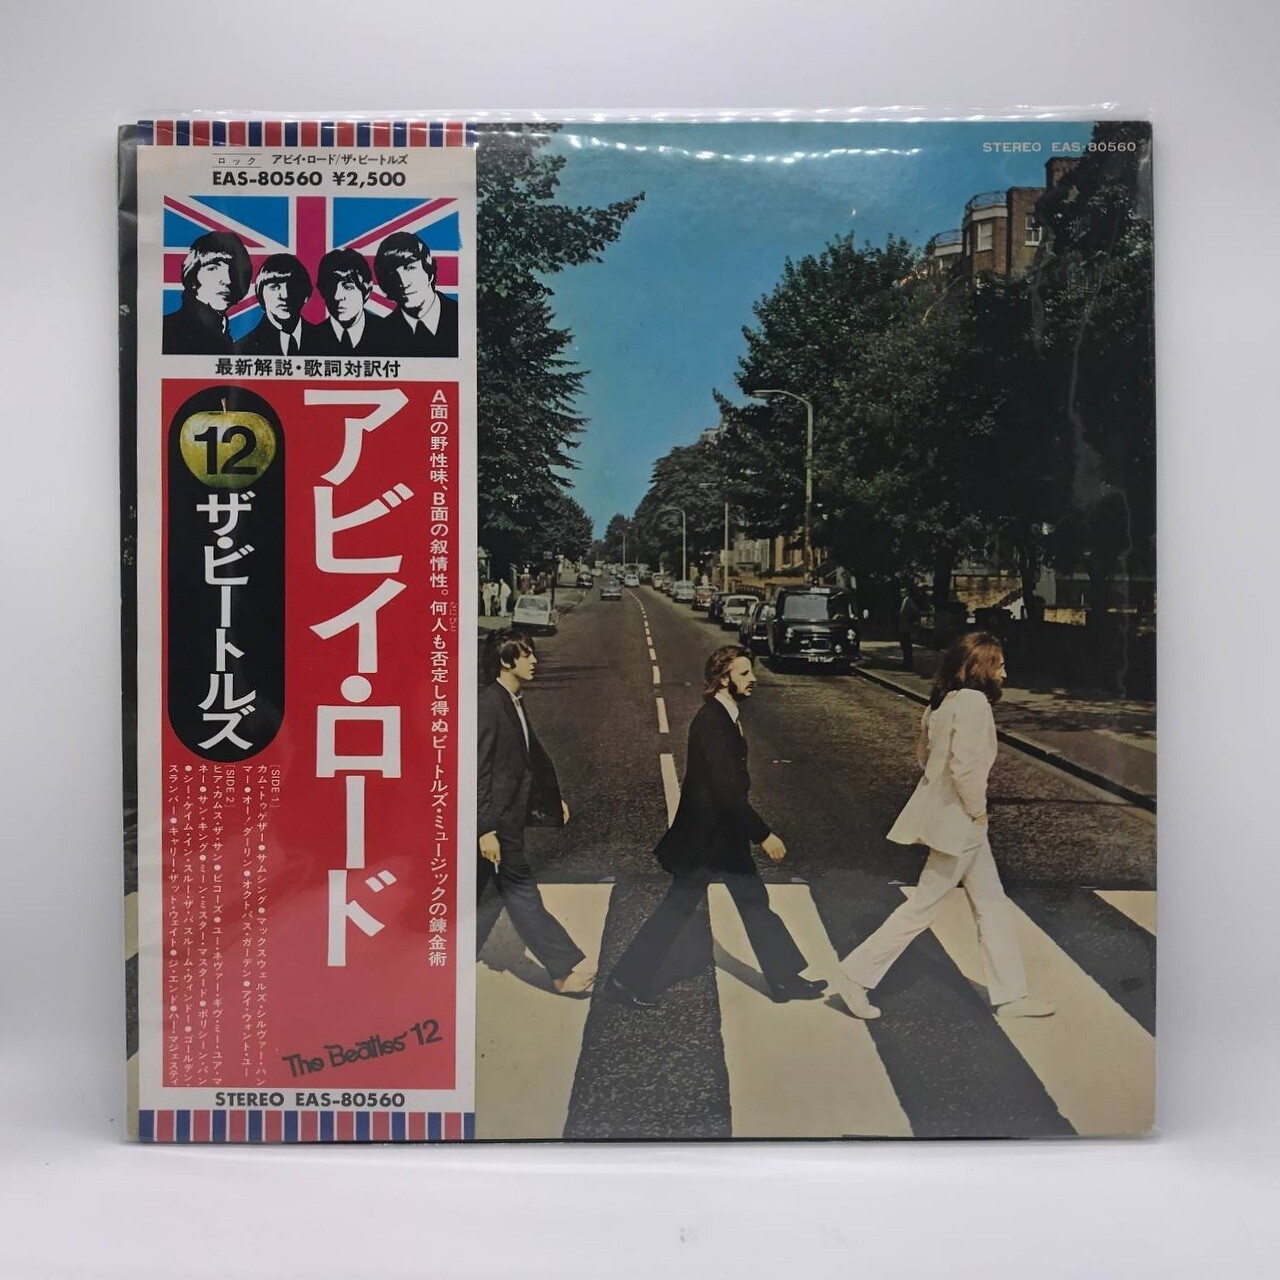 [USED] THE BEATLES -ABBEY ROAD- LP (JAPAN PRESS)